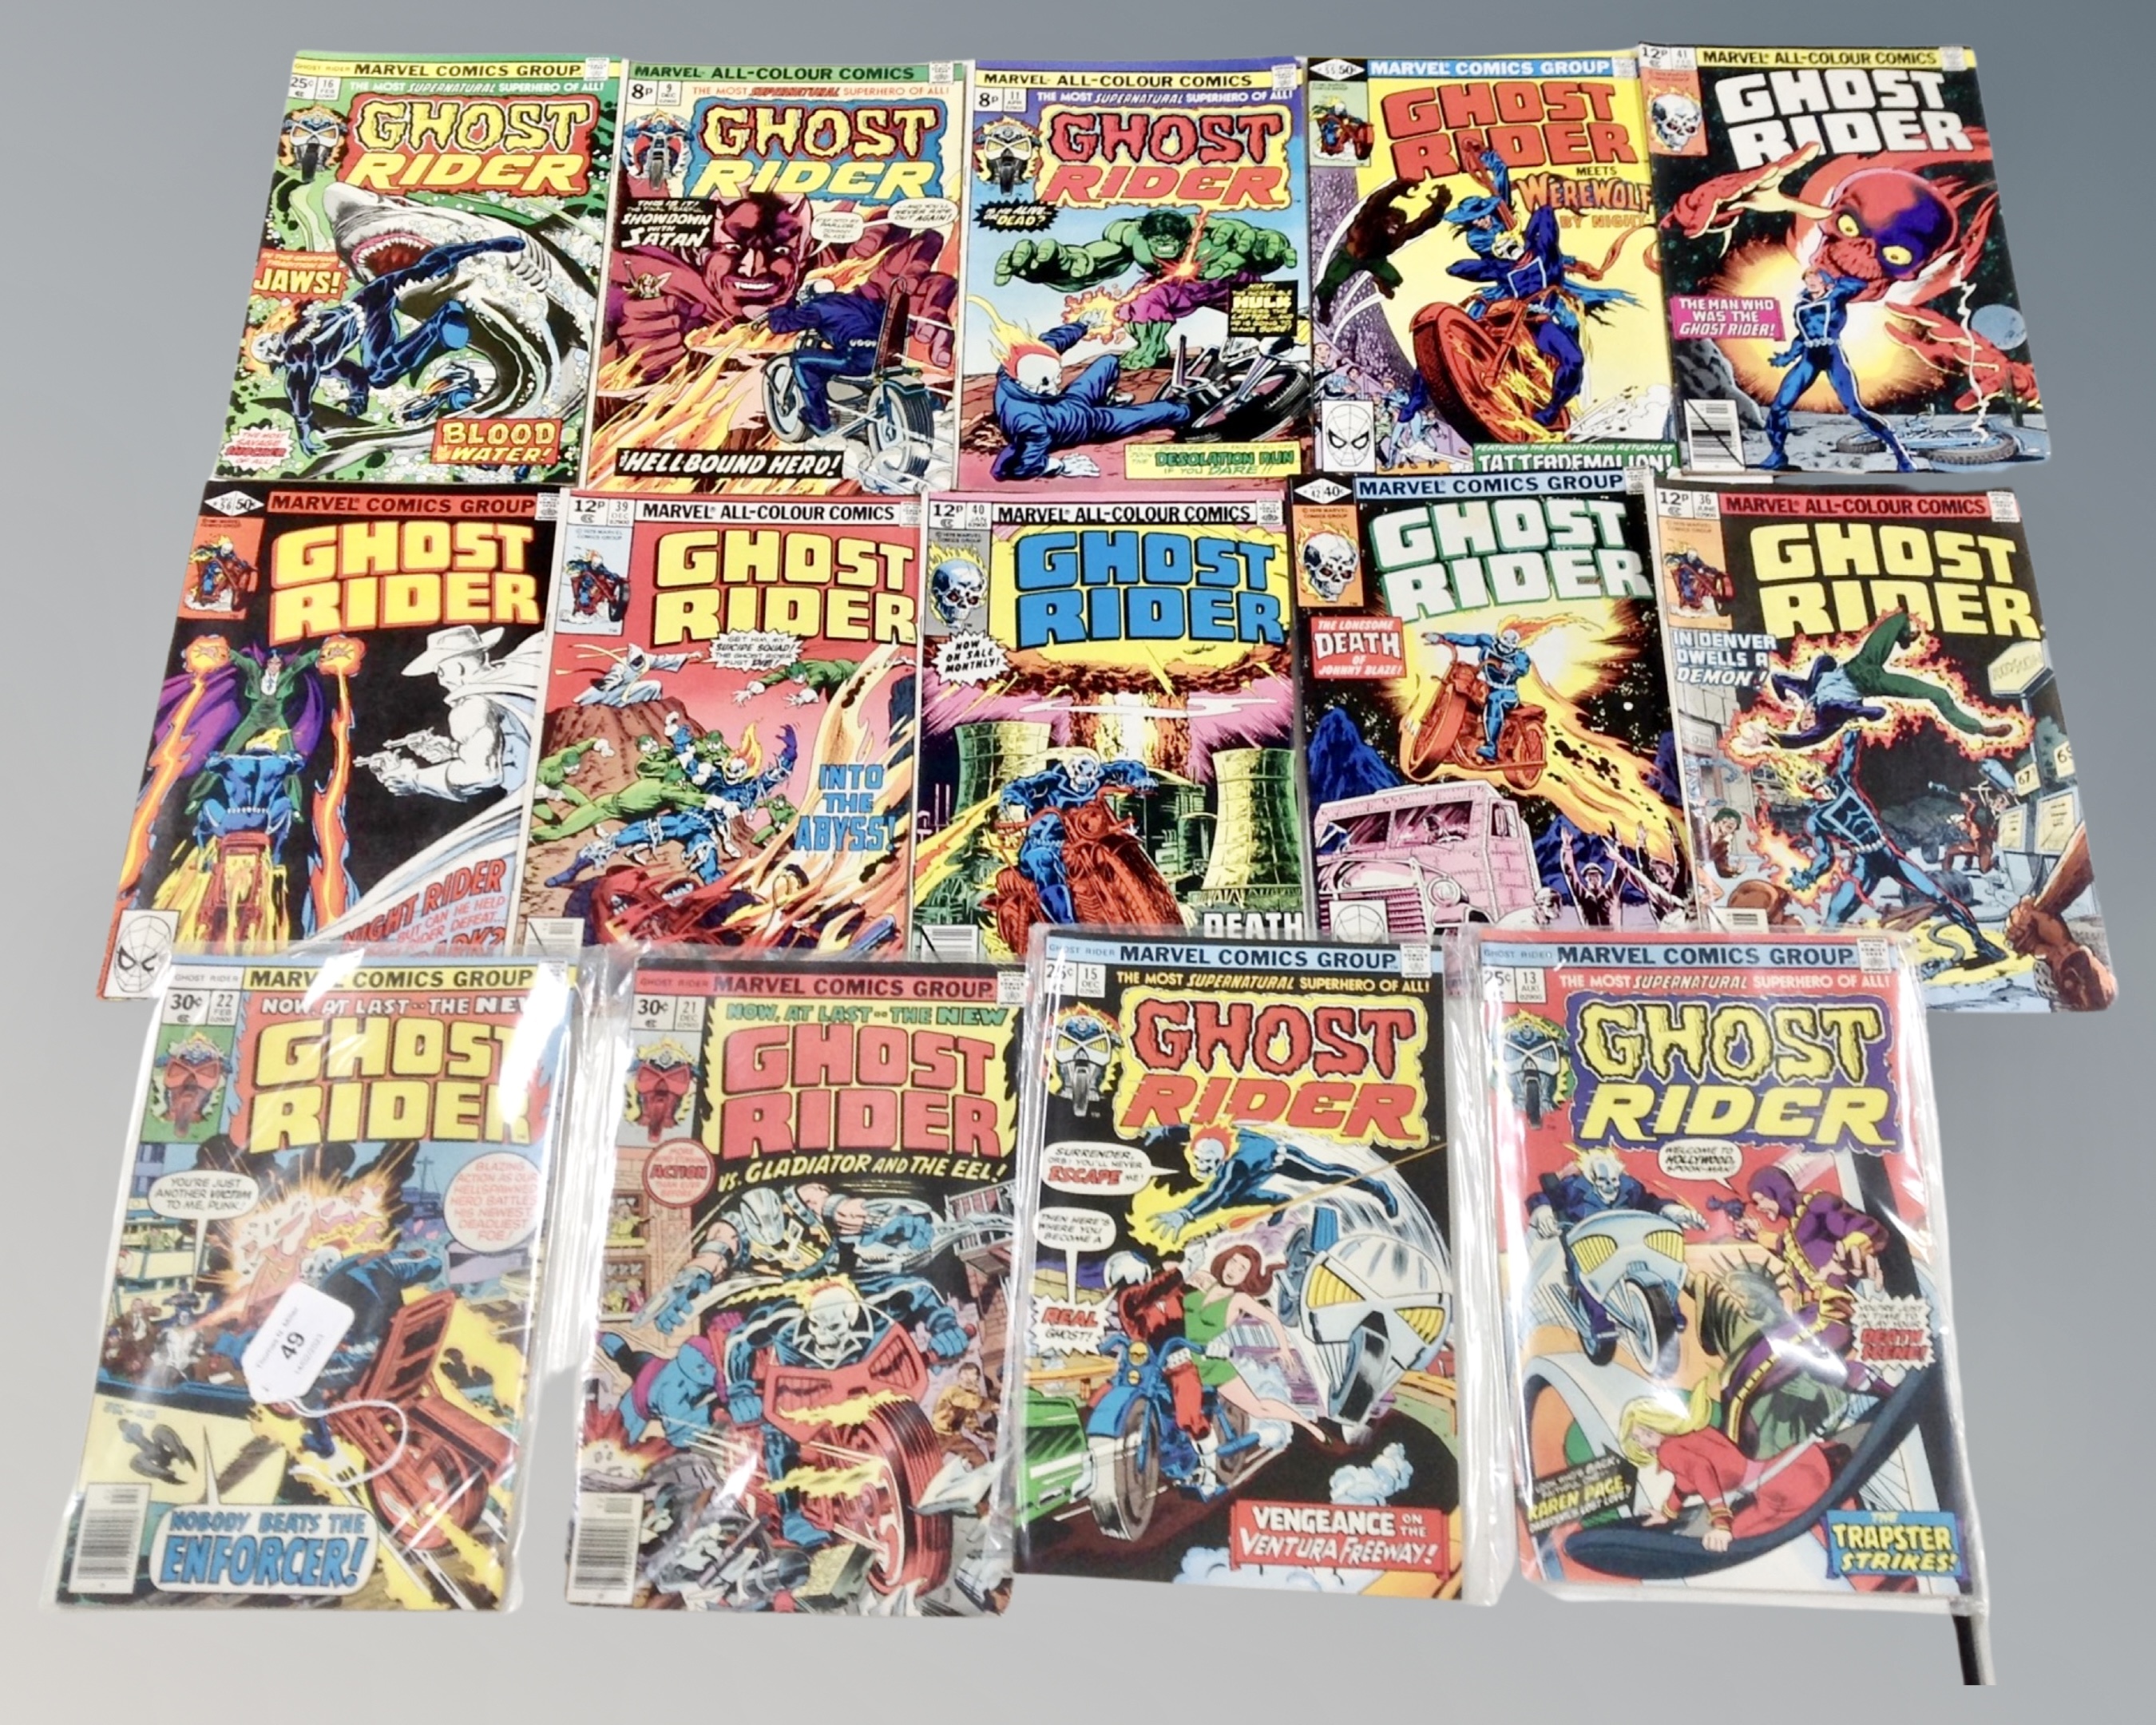 Marvel Comics : The Defenders, thirty two issues, together with forty two issues of Ghost Rider.